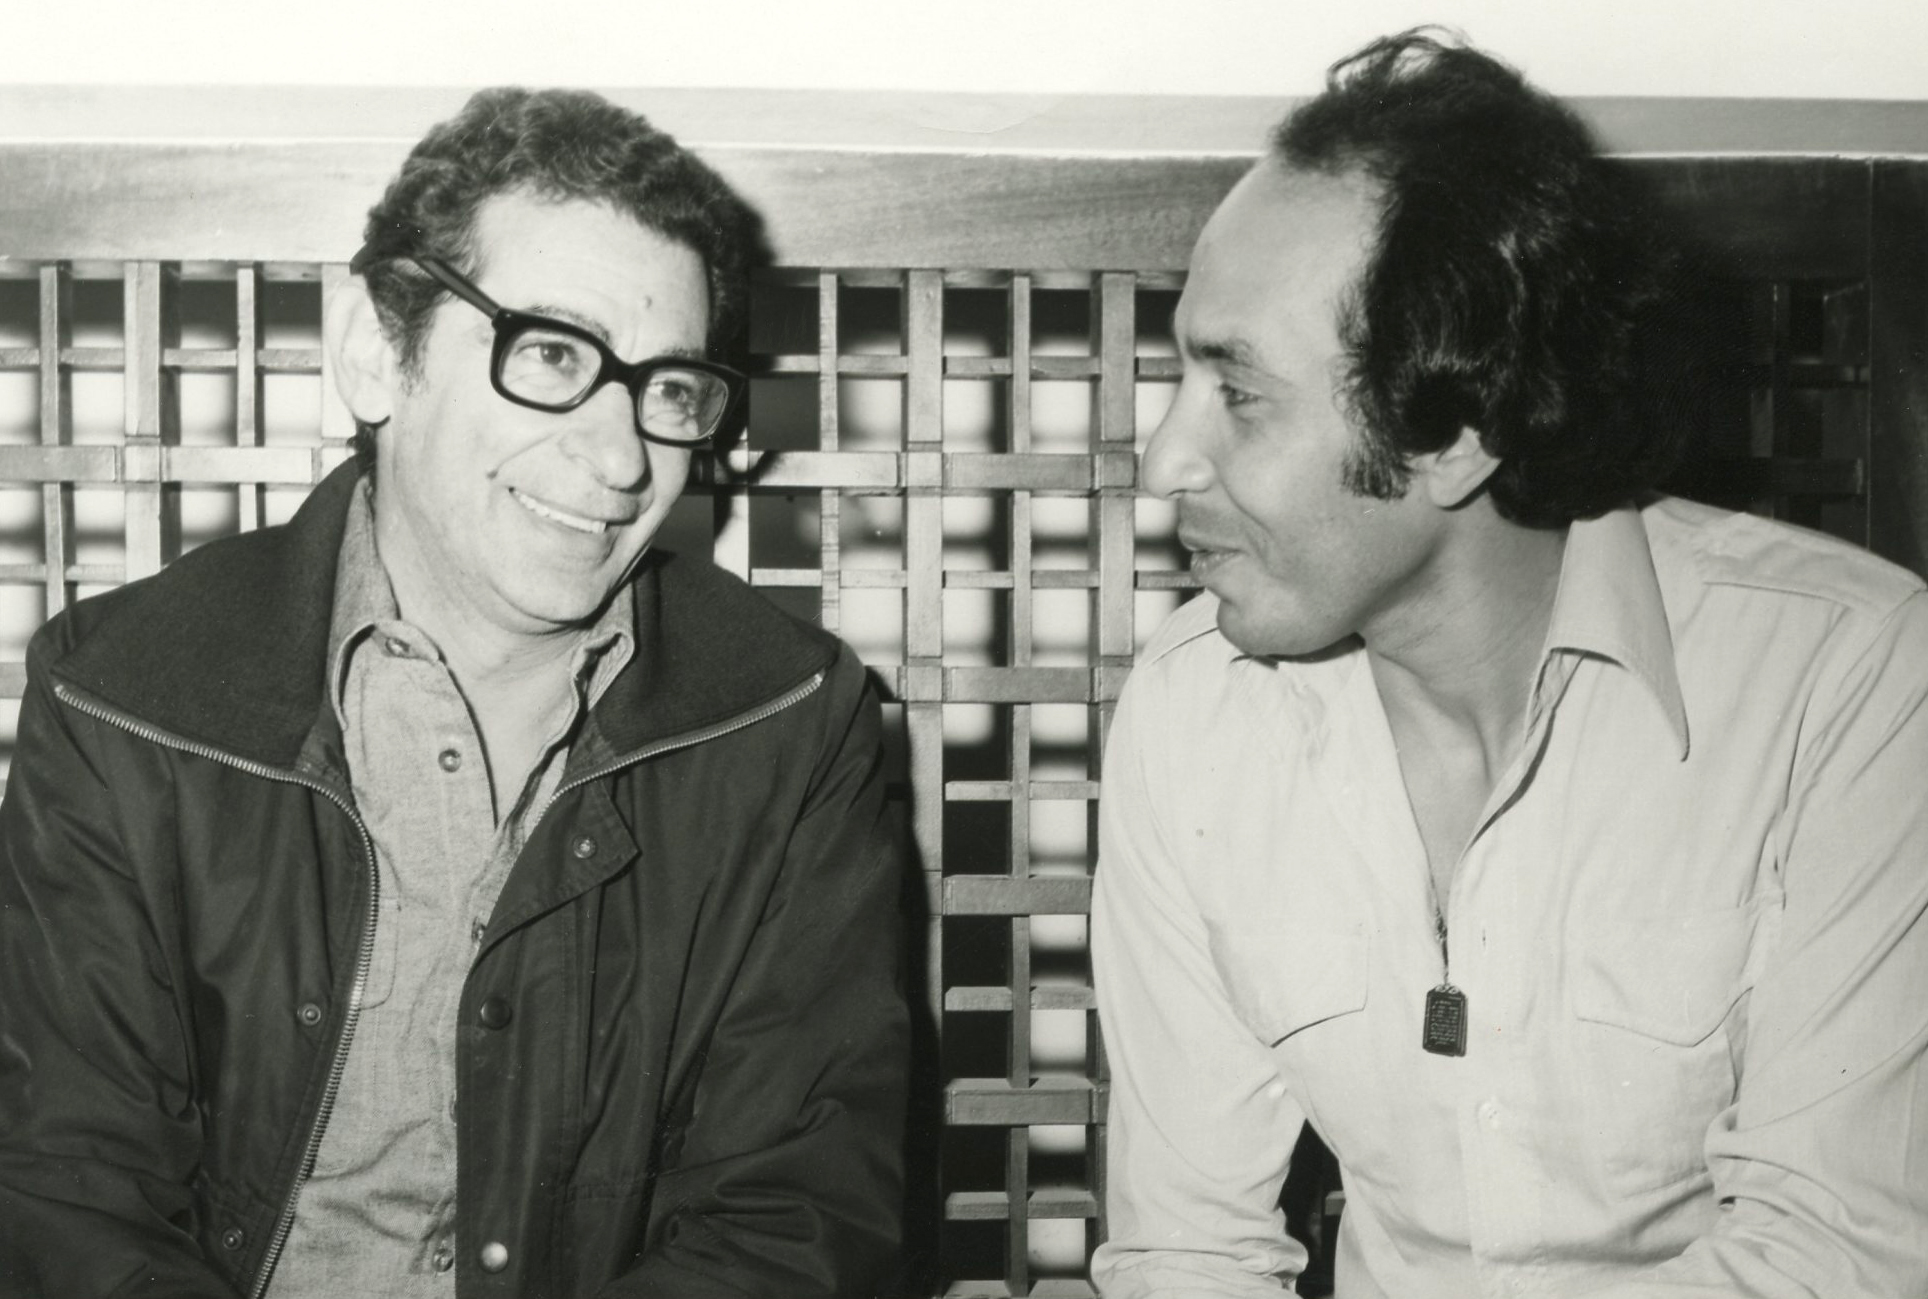 With Youssef Chahine the renowned Egyptian filmmaker in 1978